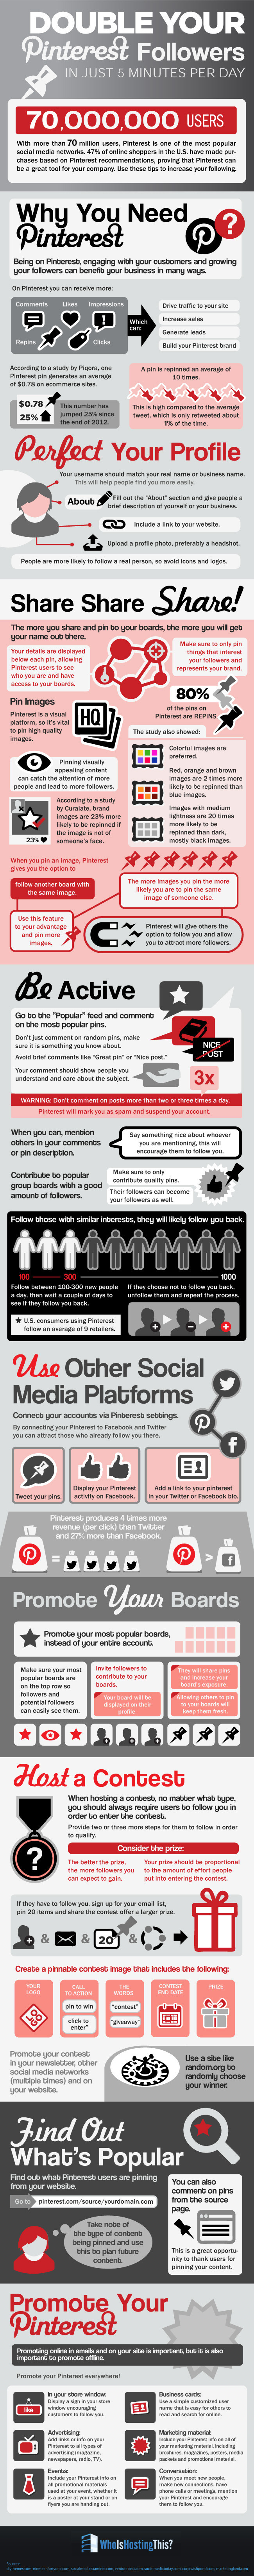 Pinterest for business infographic